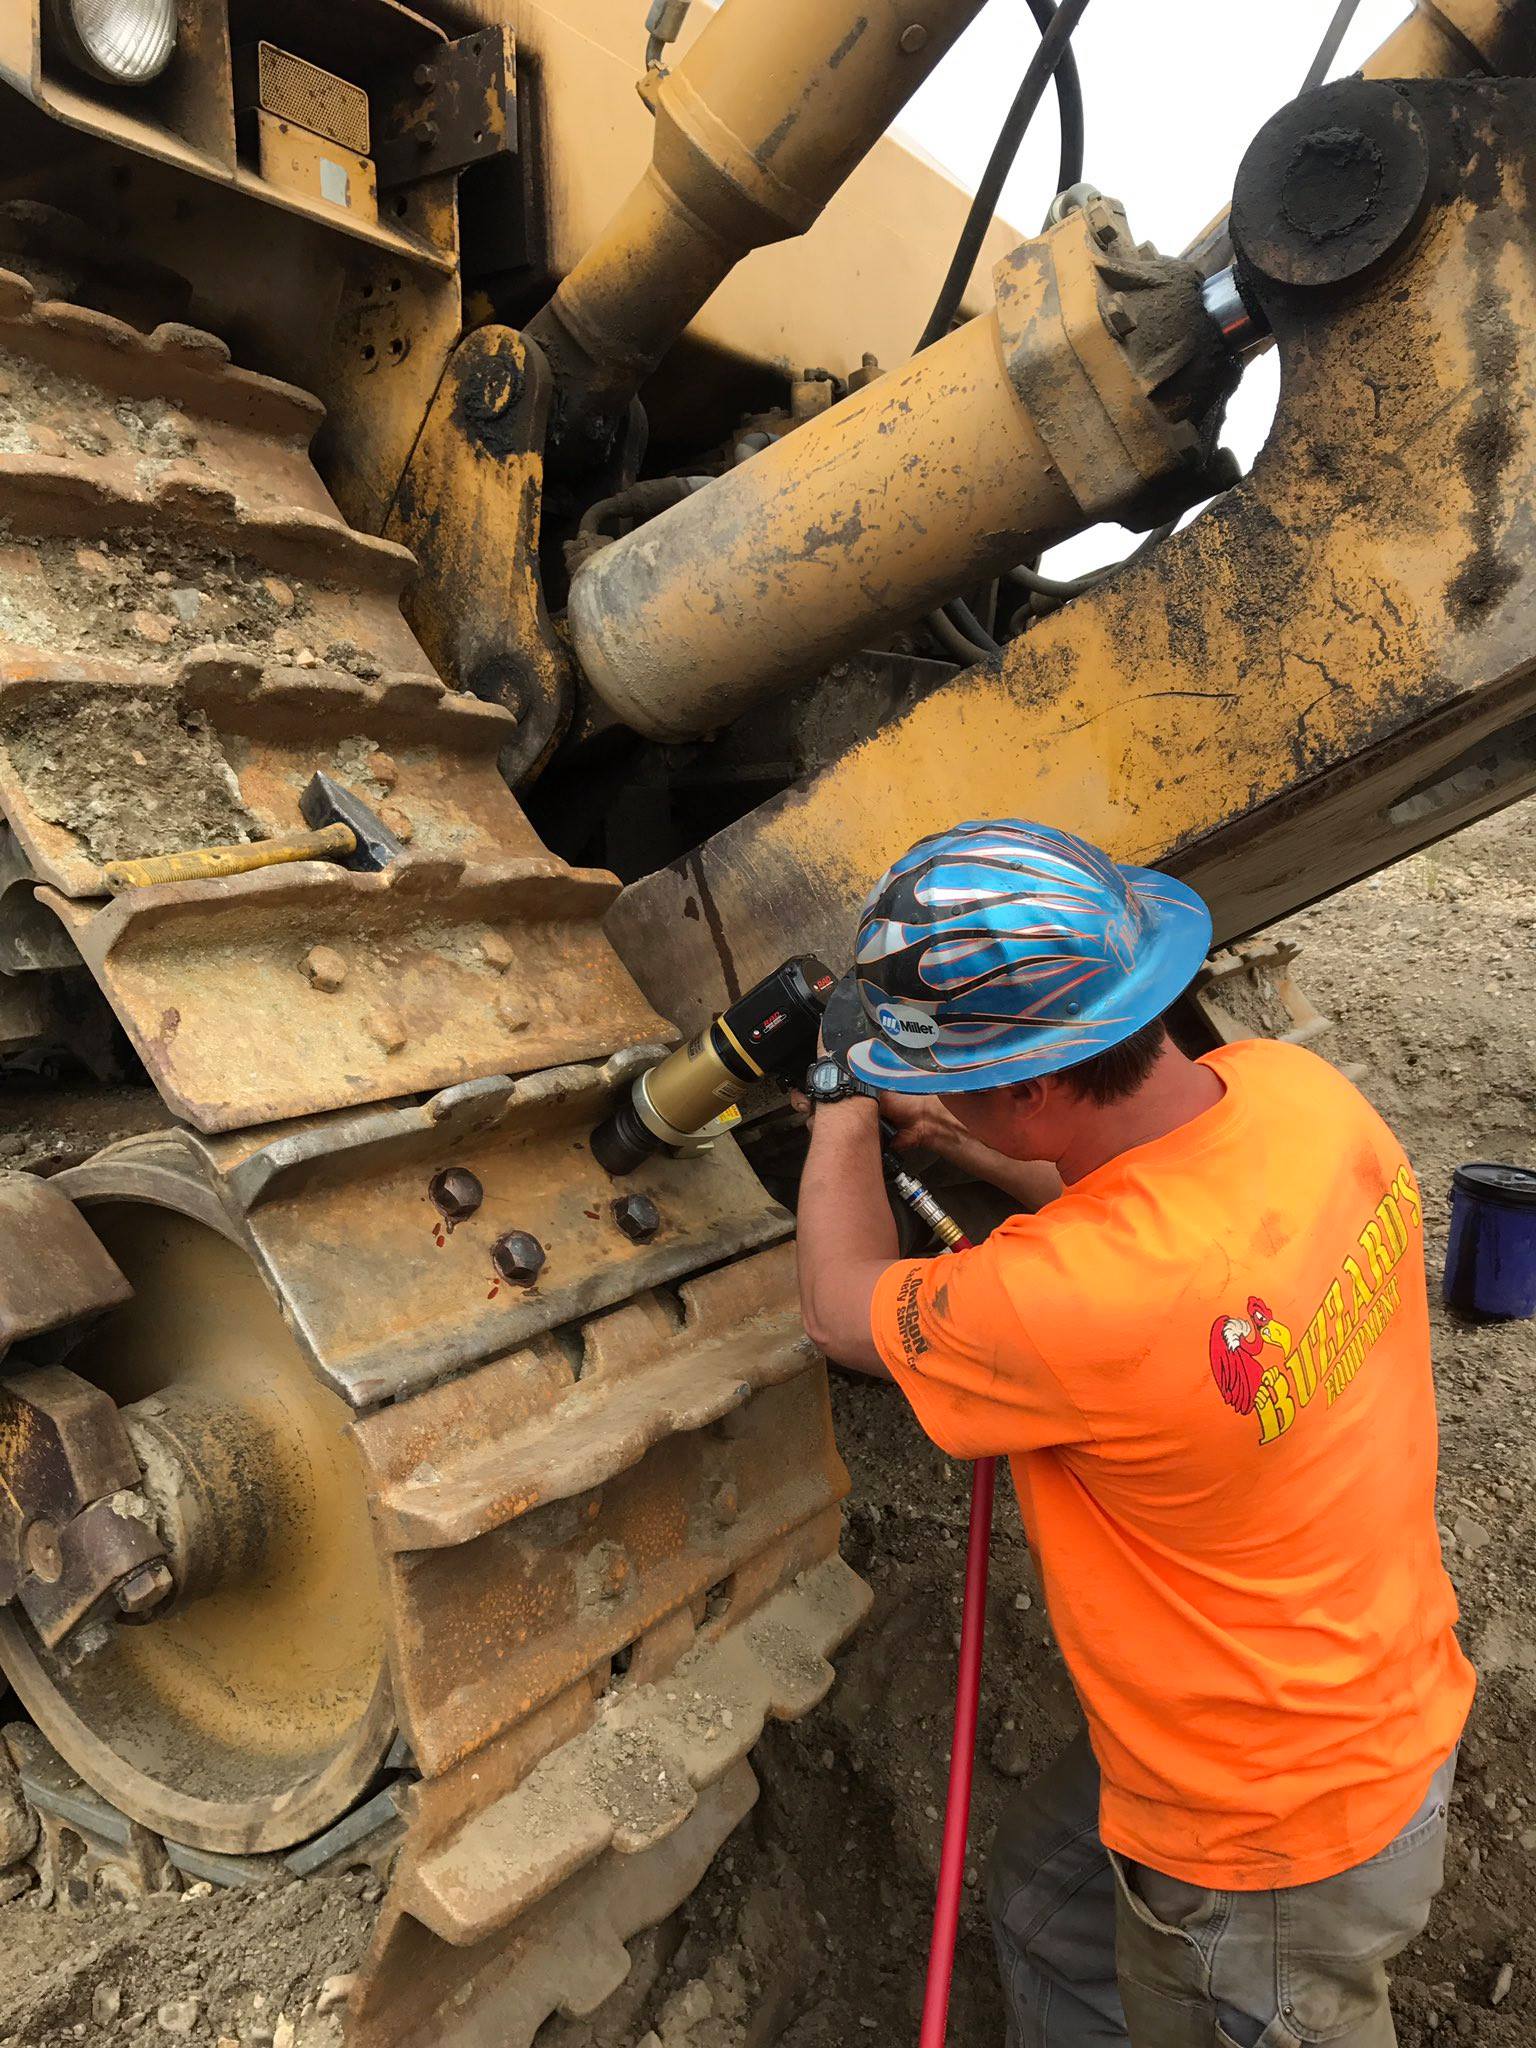 Gold Rush Mitch using a RAD pneumatic torque wrench on mining equipment